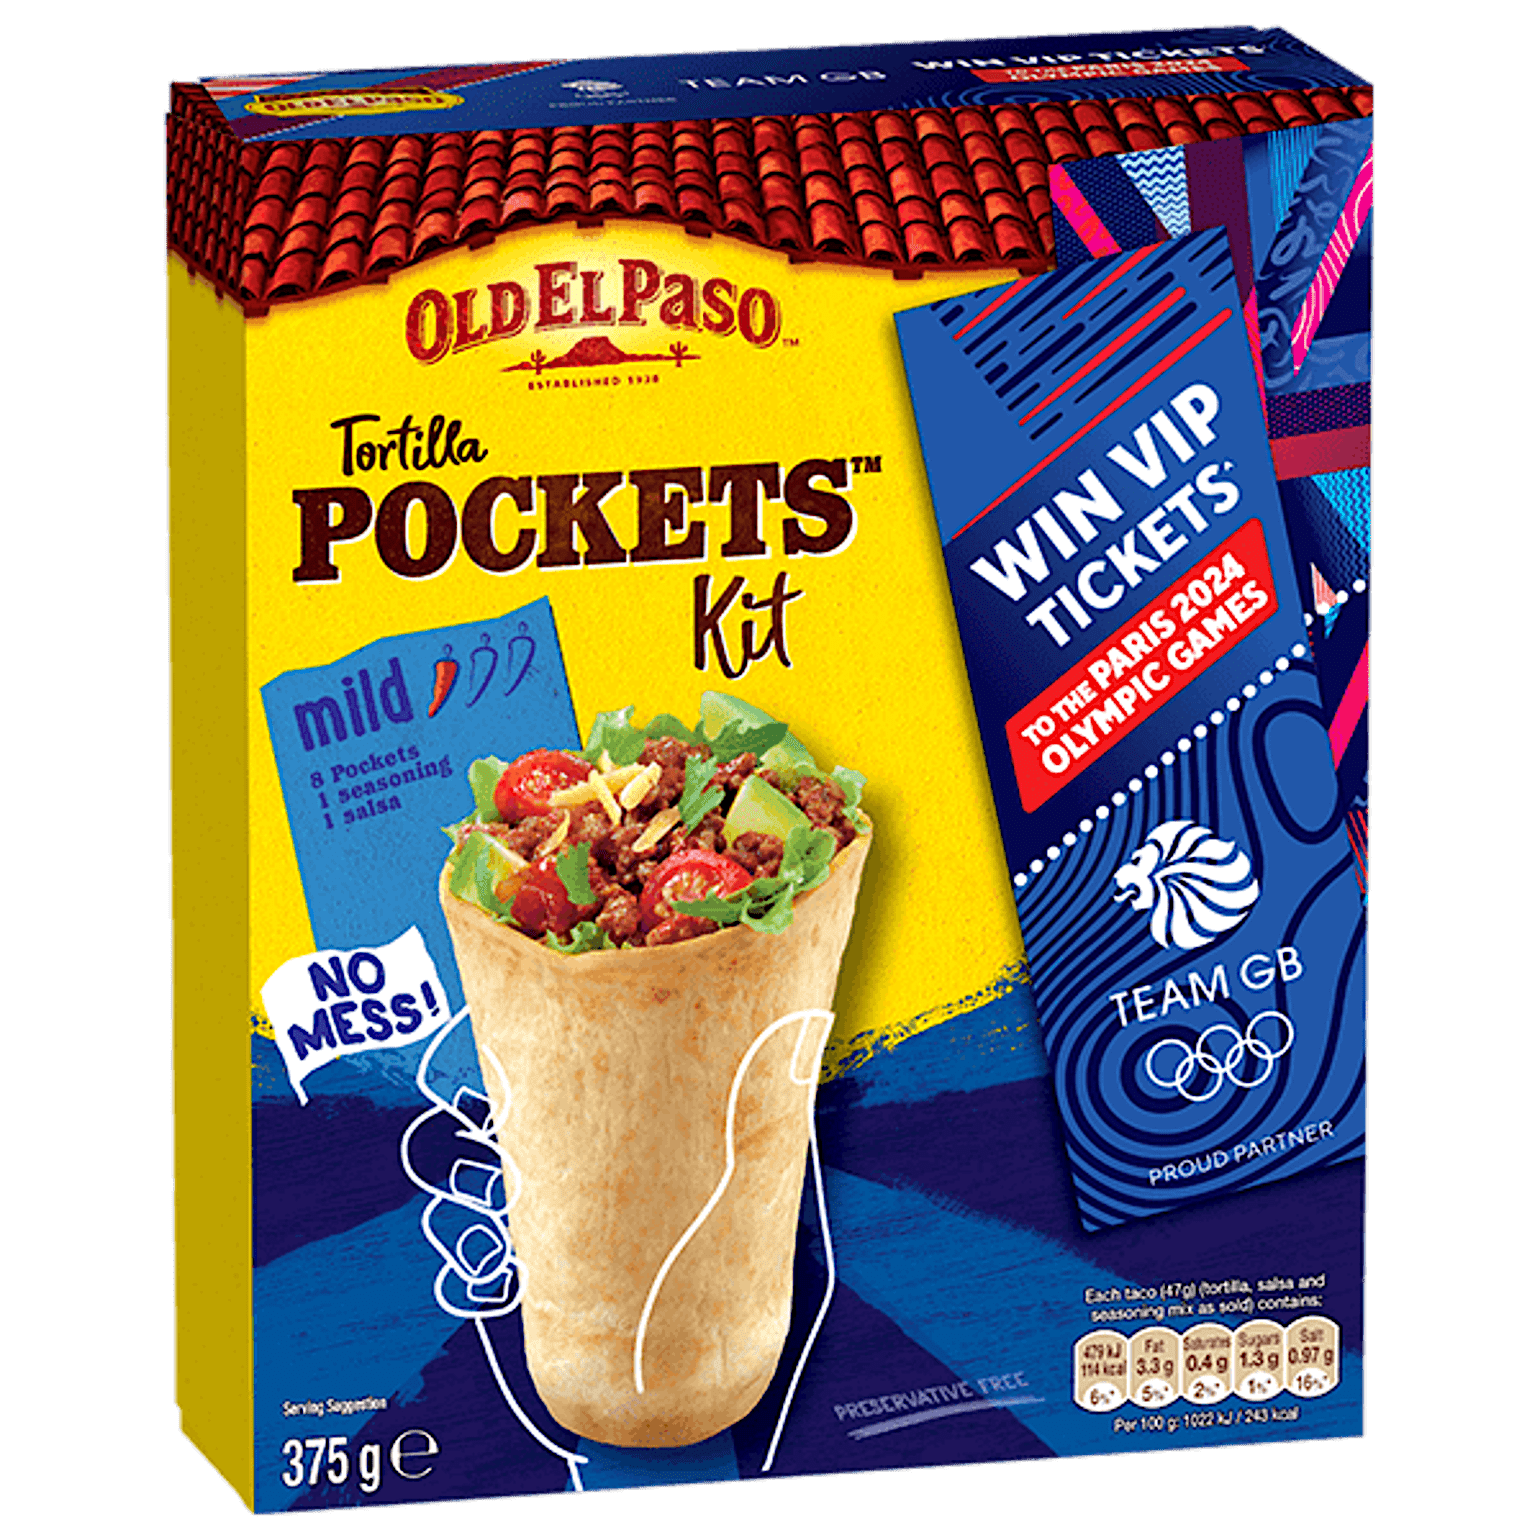 pack of Old El Paso's tortilla pockets kit promoting paris olympic competition (375g)